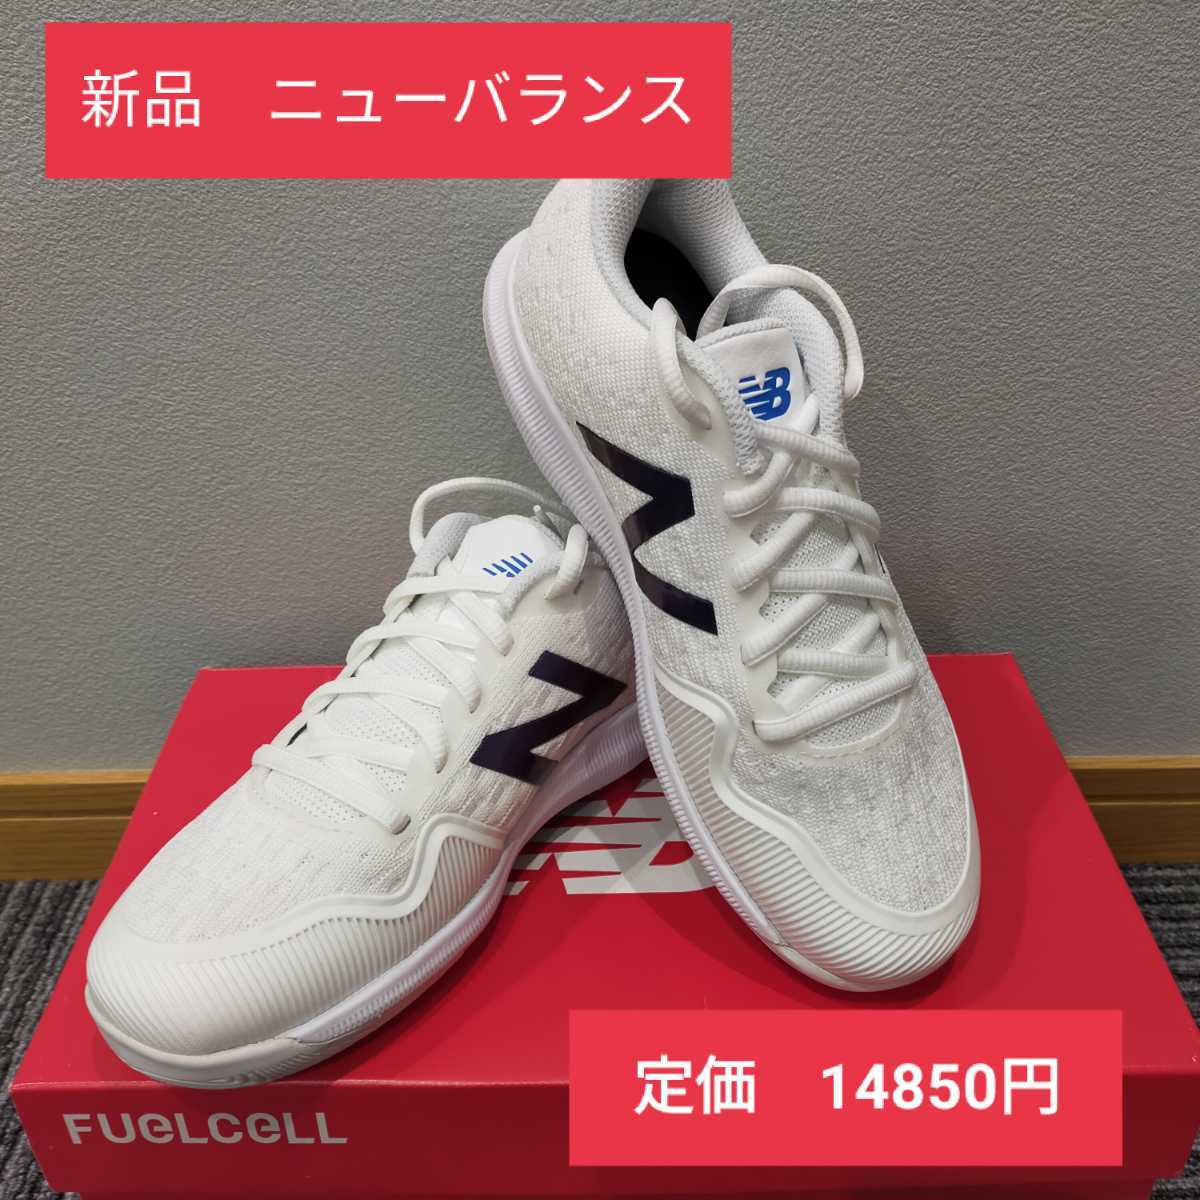 New balance fuel cell